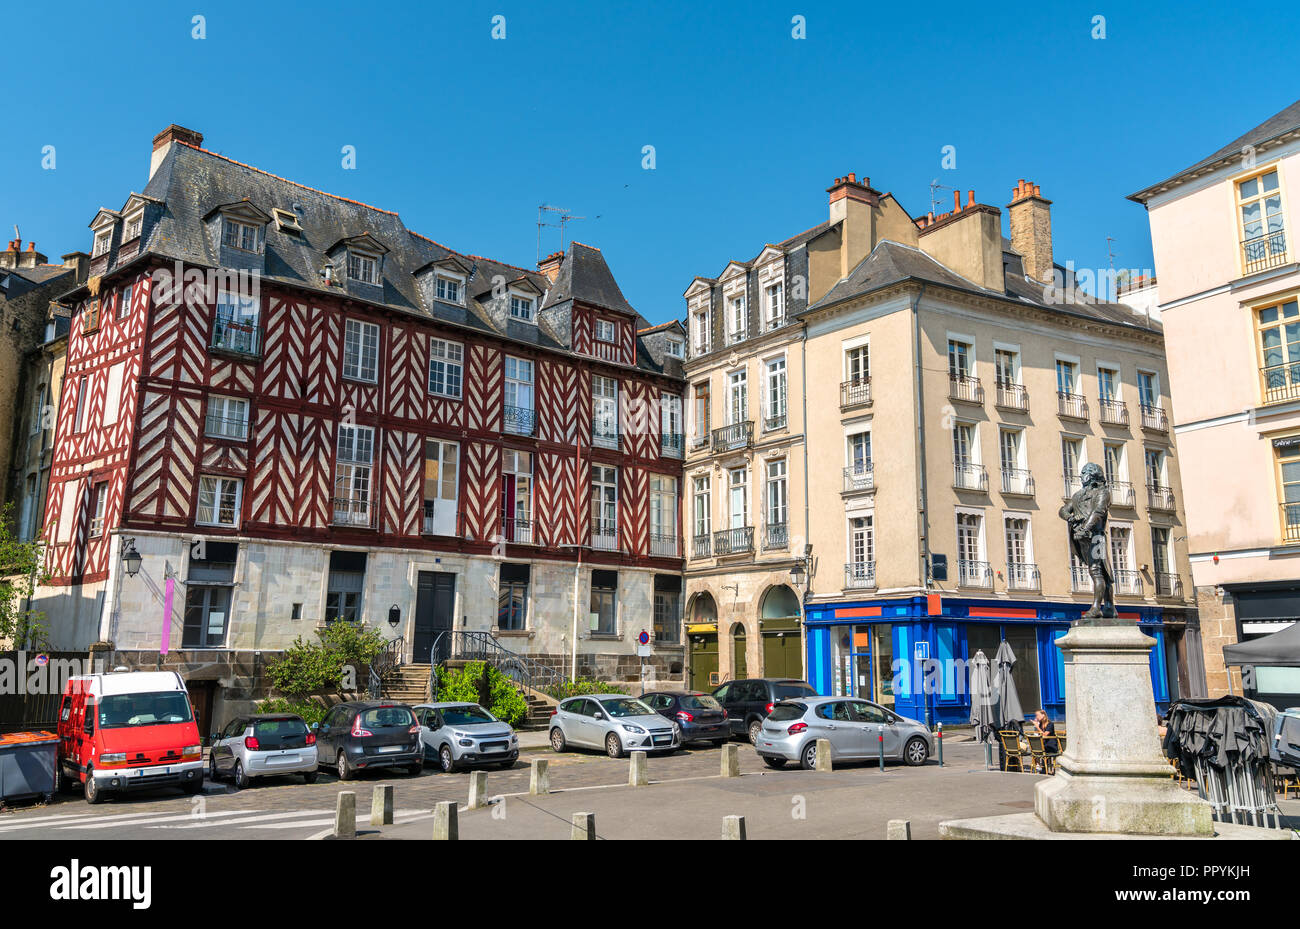 Traditional half-timbered houses in the old town of Rennes, France Stock Photo